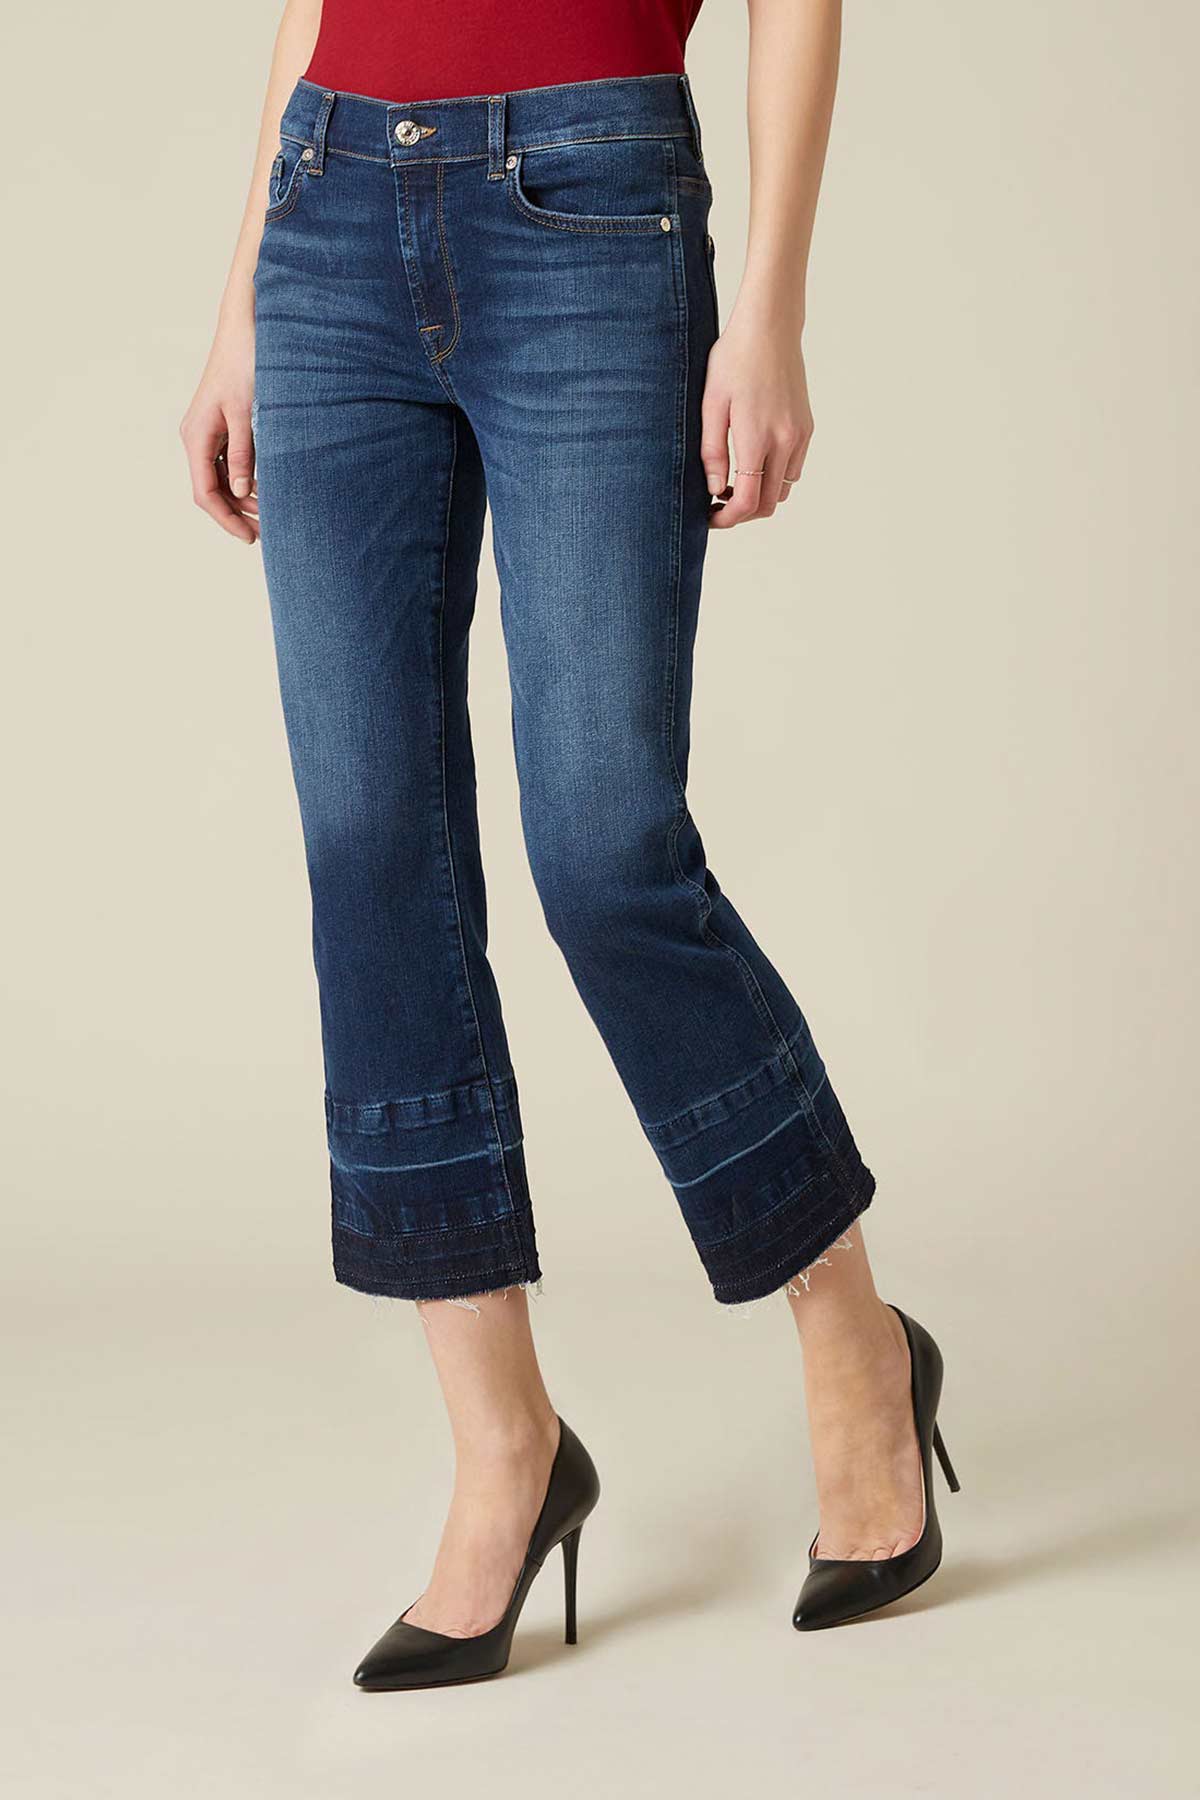 7 For All Mankind Cropped Boot Jeans-Libas Trendy Fashion Store